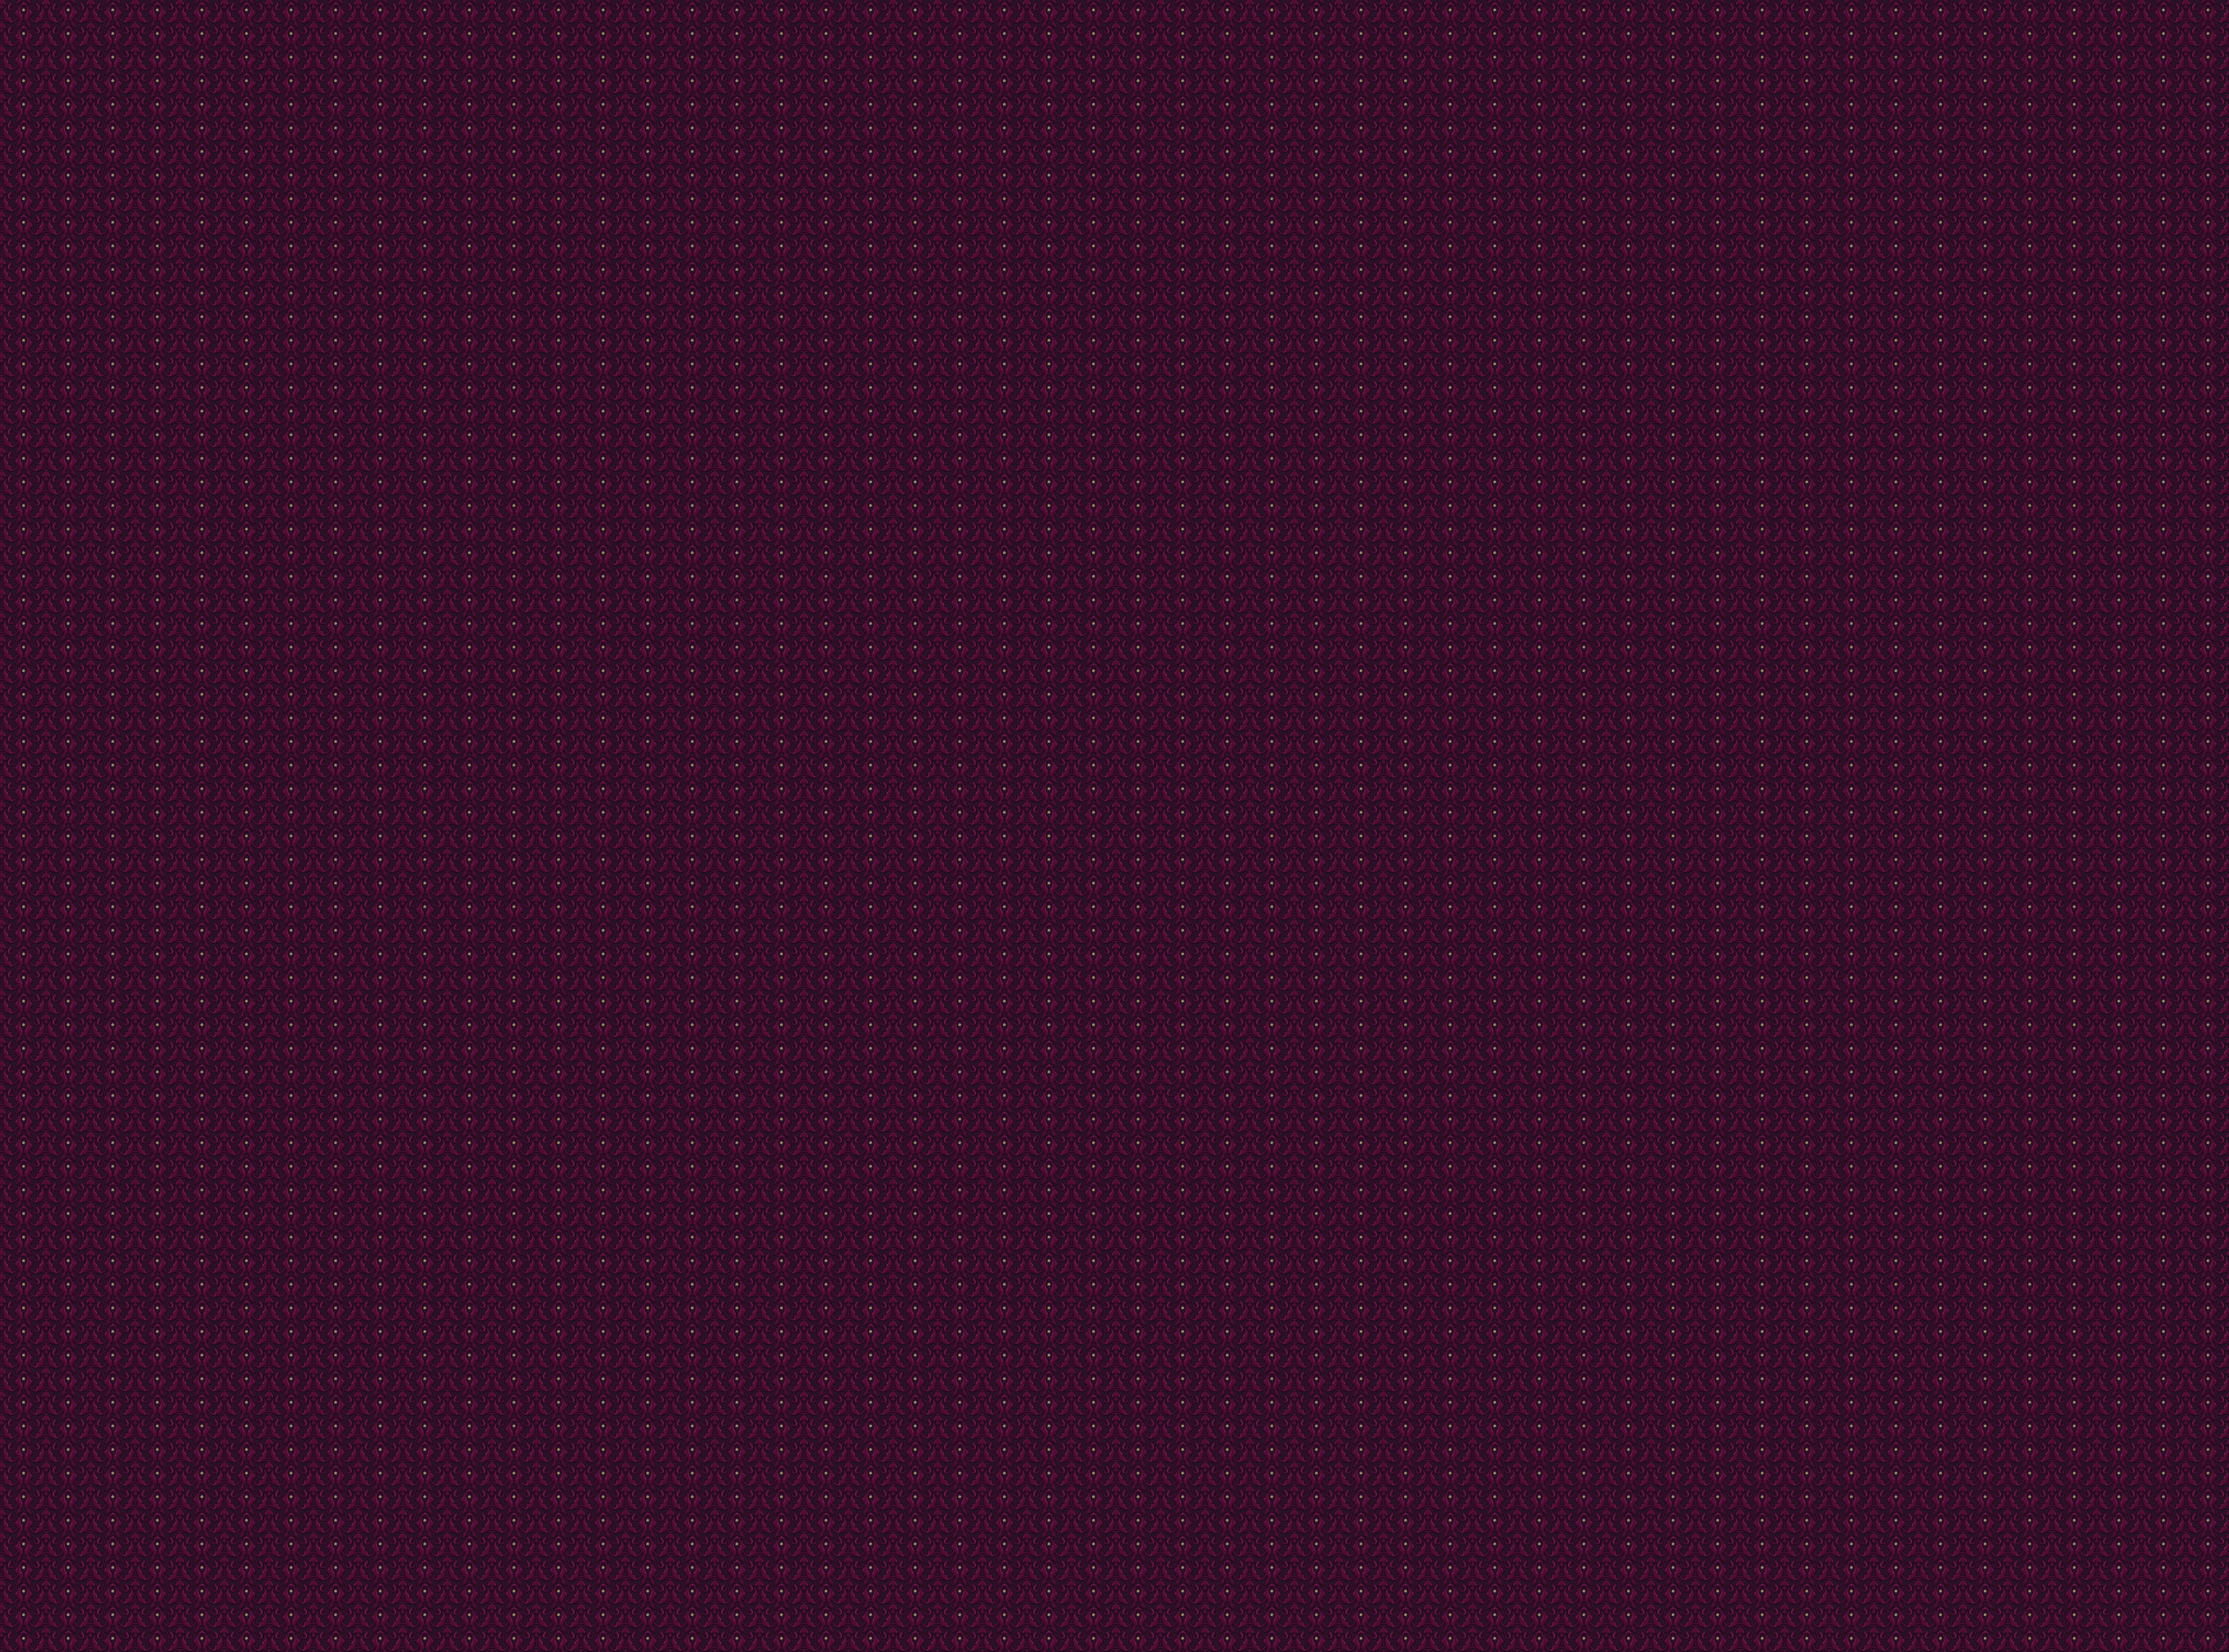 25 Free Graphical Interior Seamless Patterns amp Backgrounds